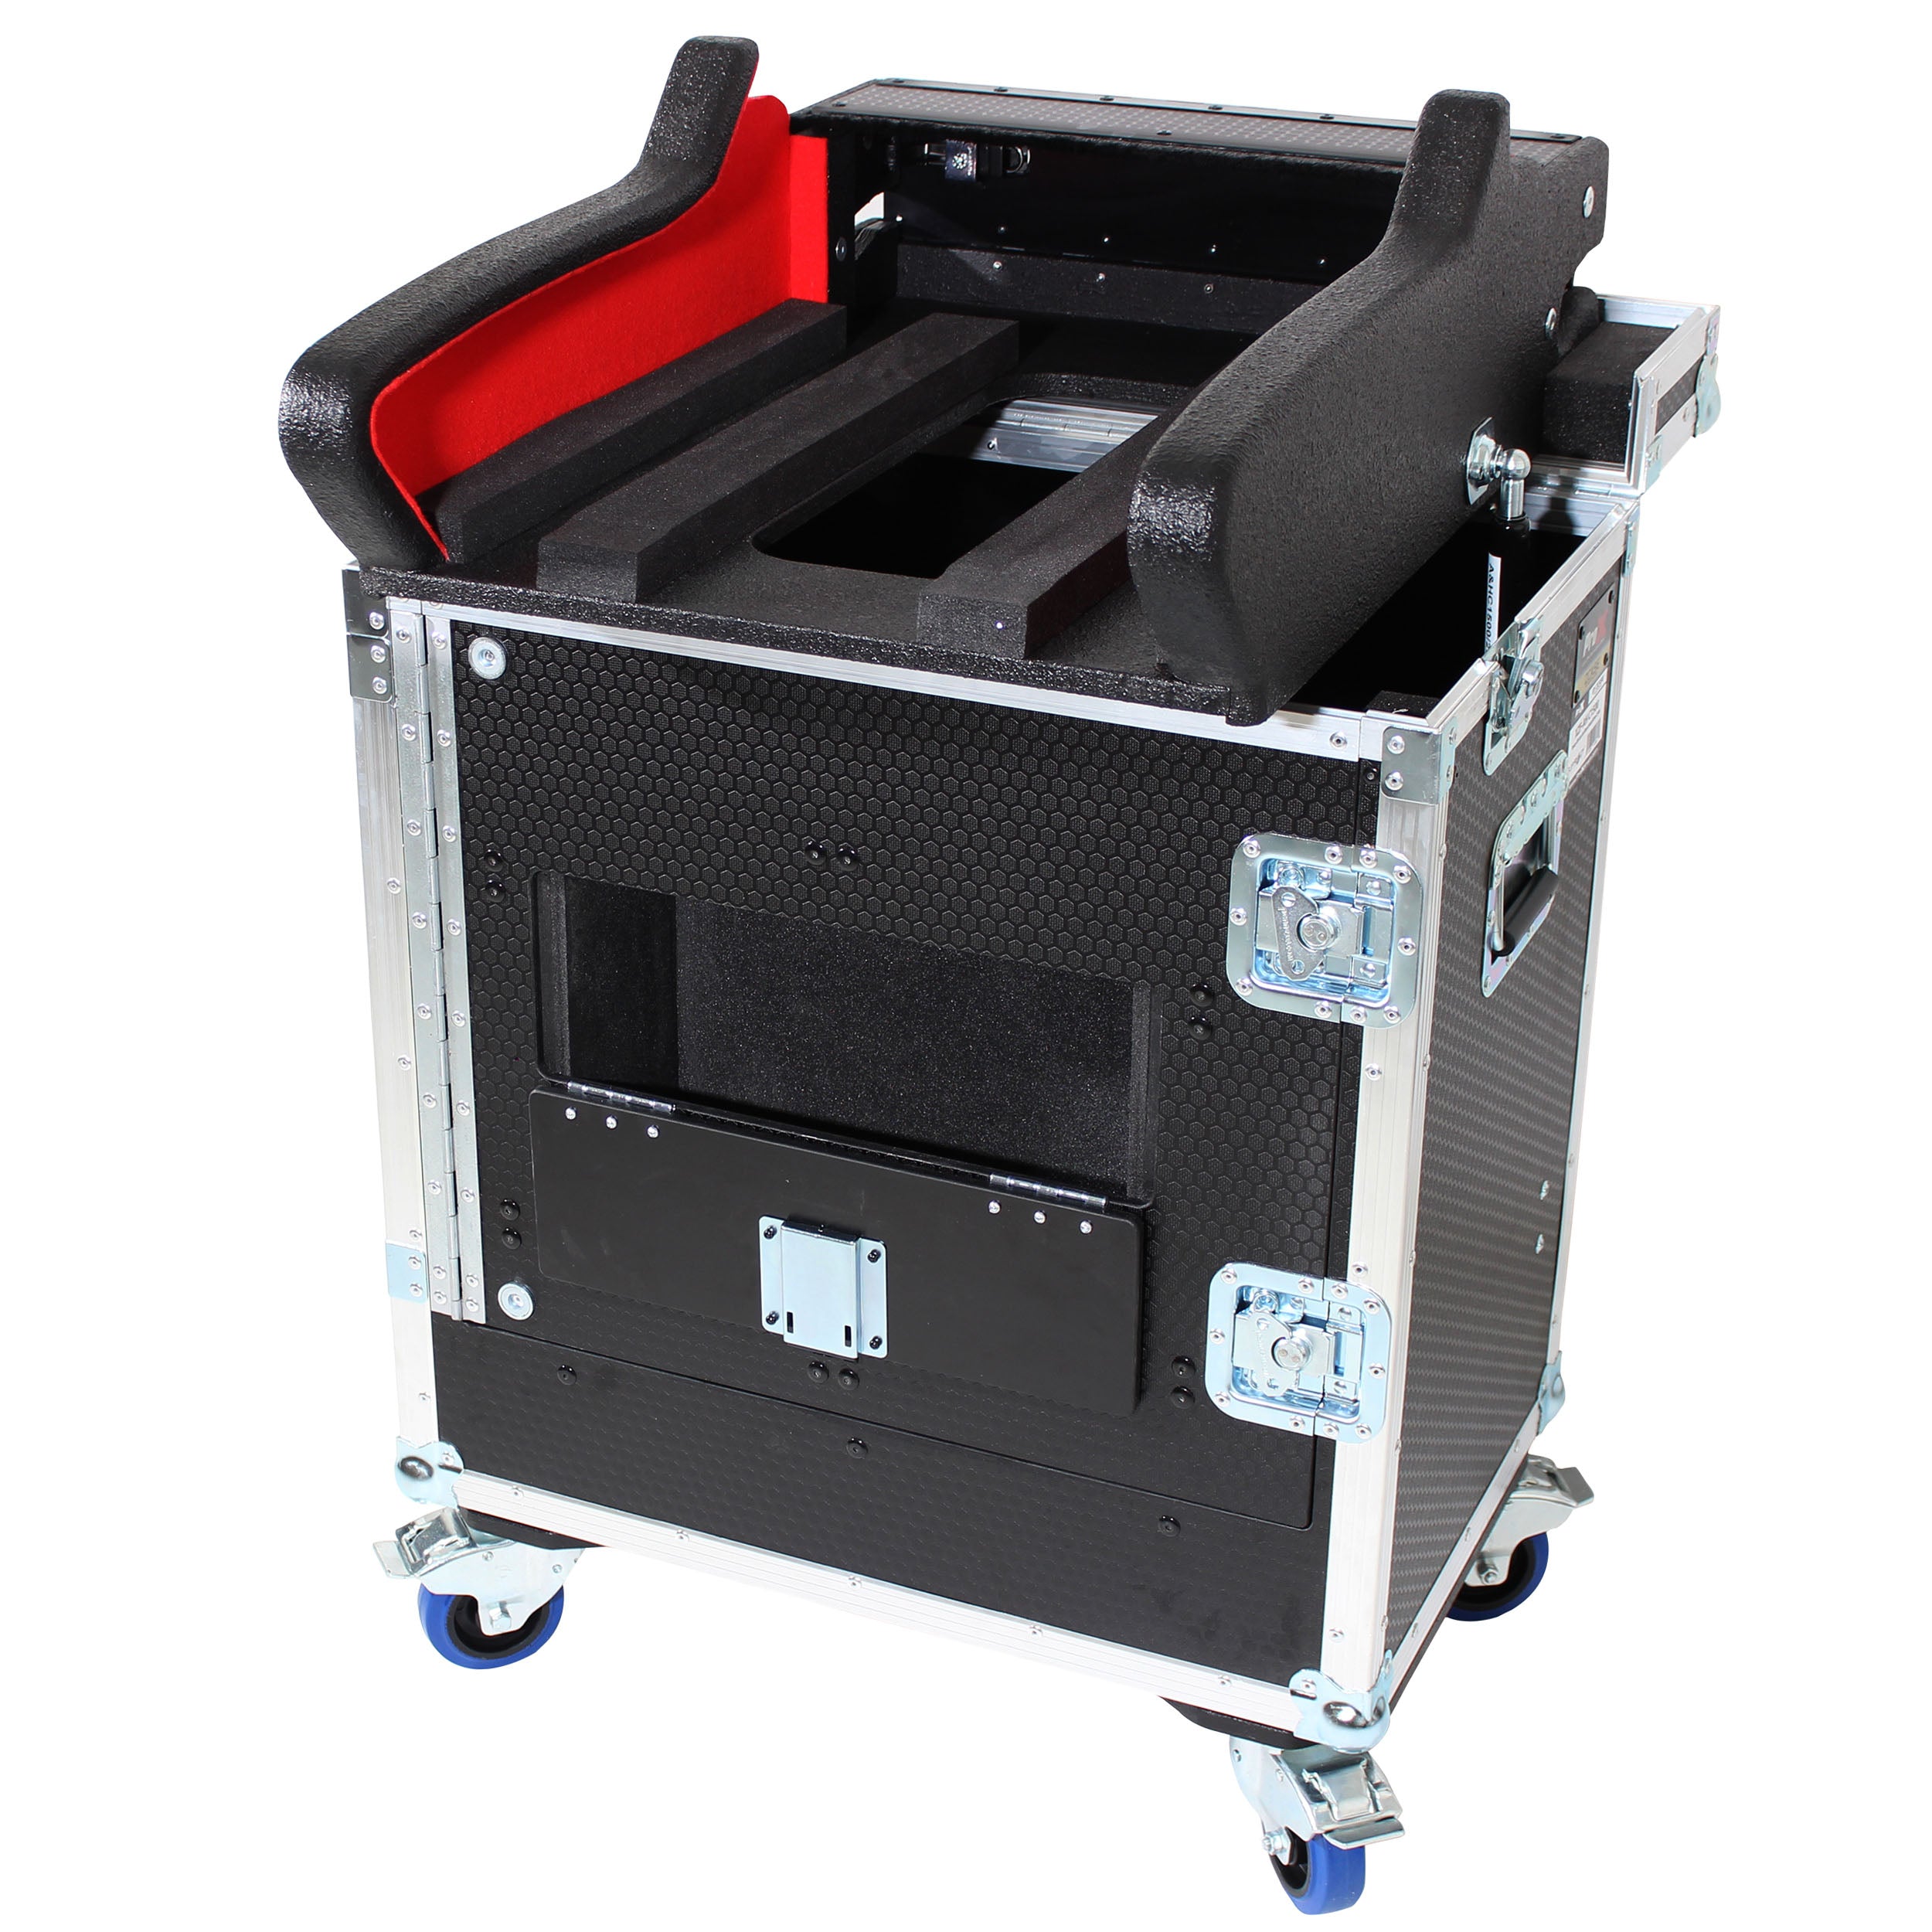 Pro X For Allen and Heath DLive C1500 Flip-Ready Hydraulic Console Easy Retracting Lifting Case by ZCASE XZF-AHC1500